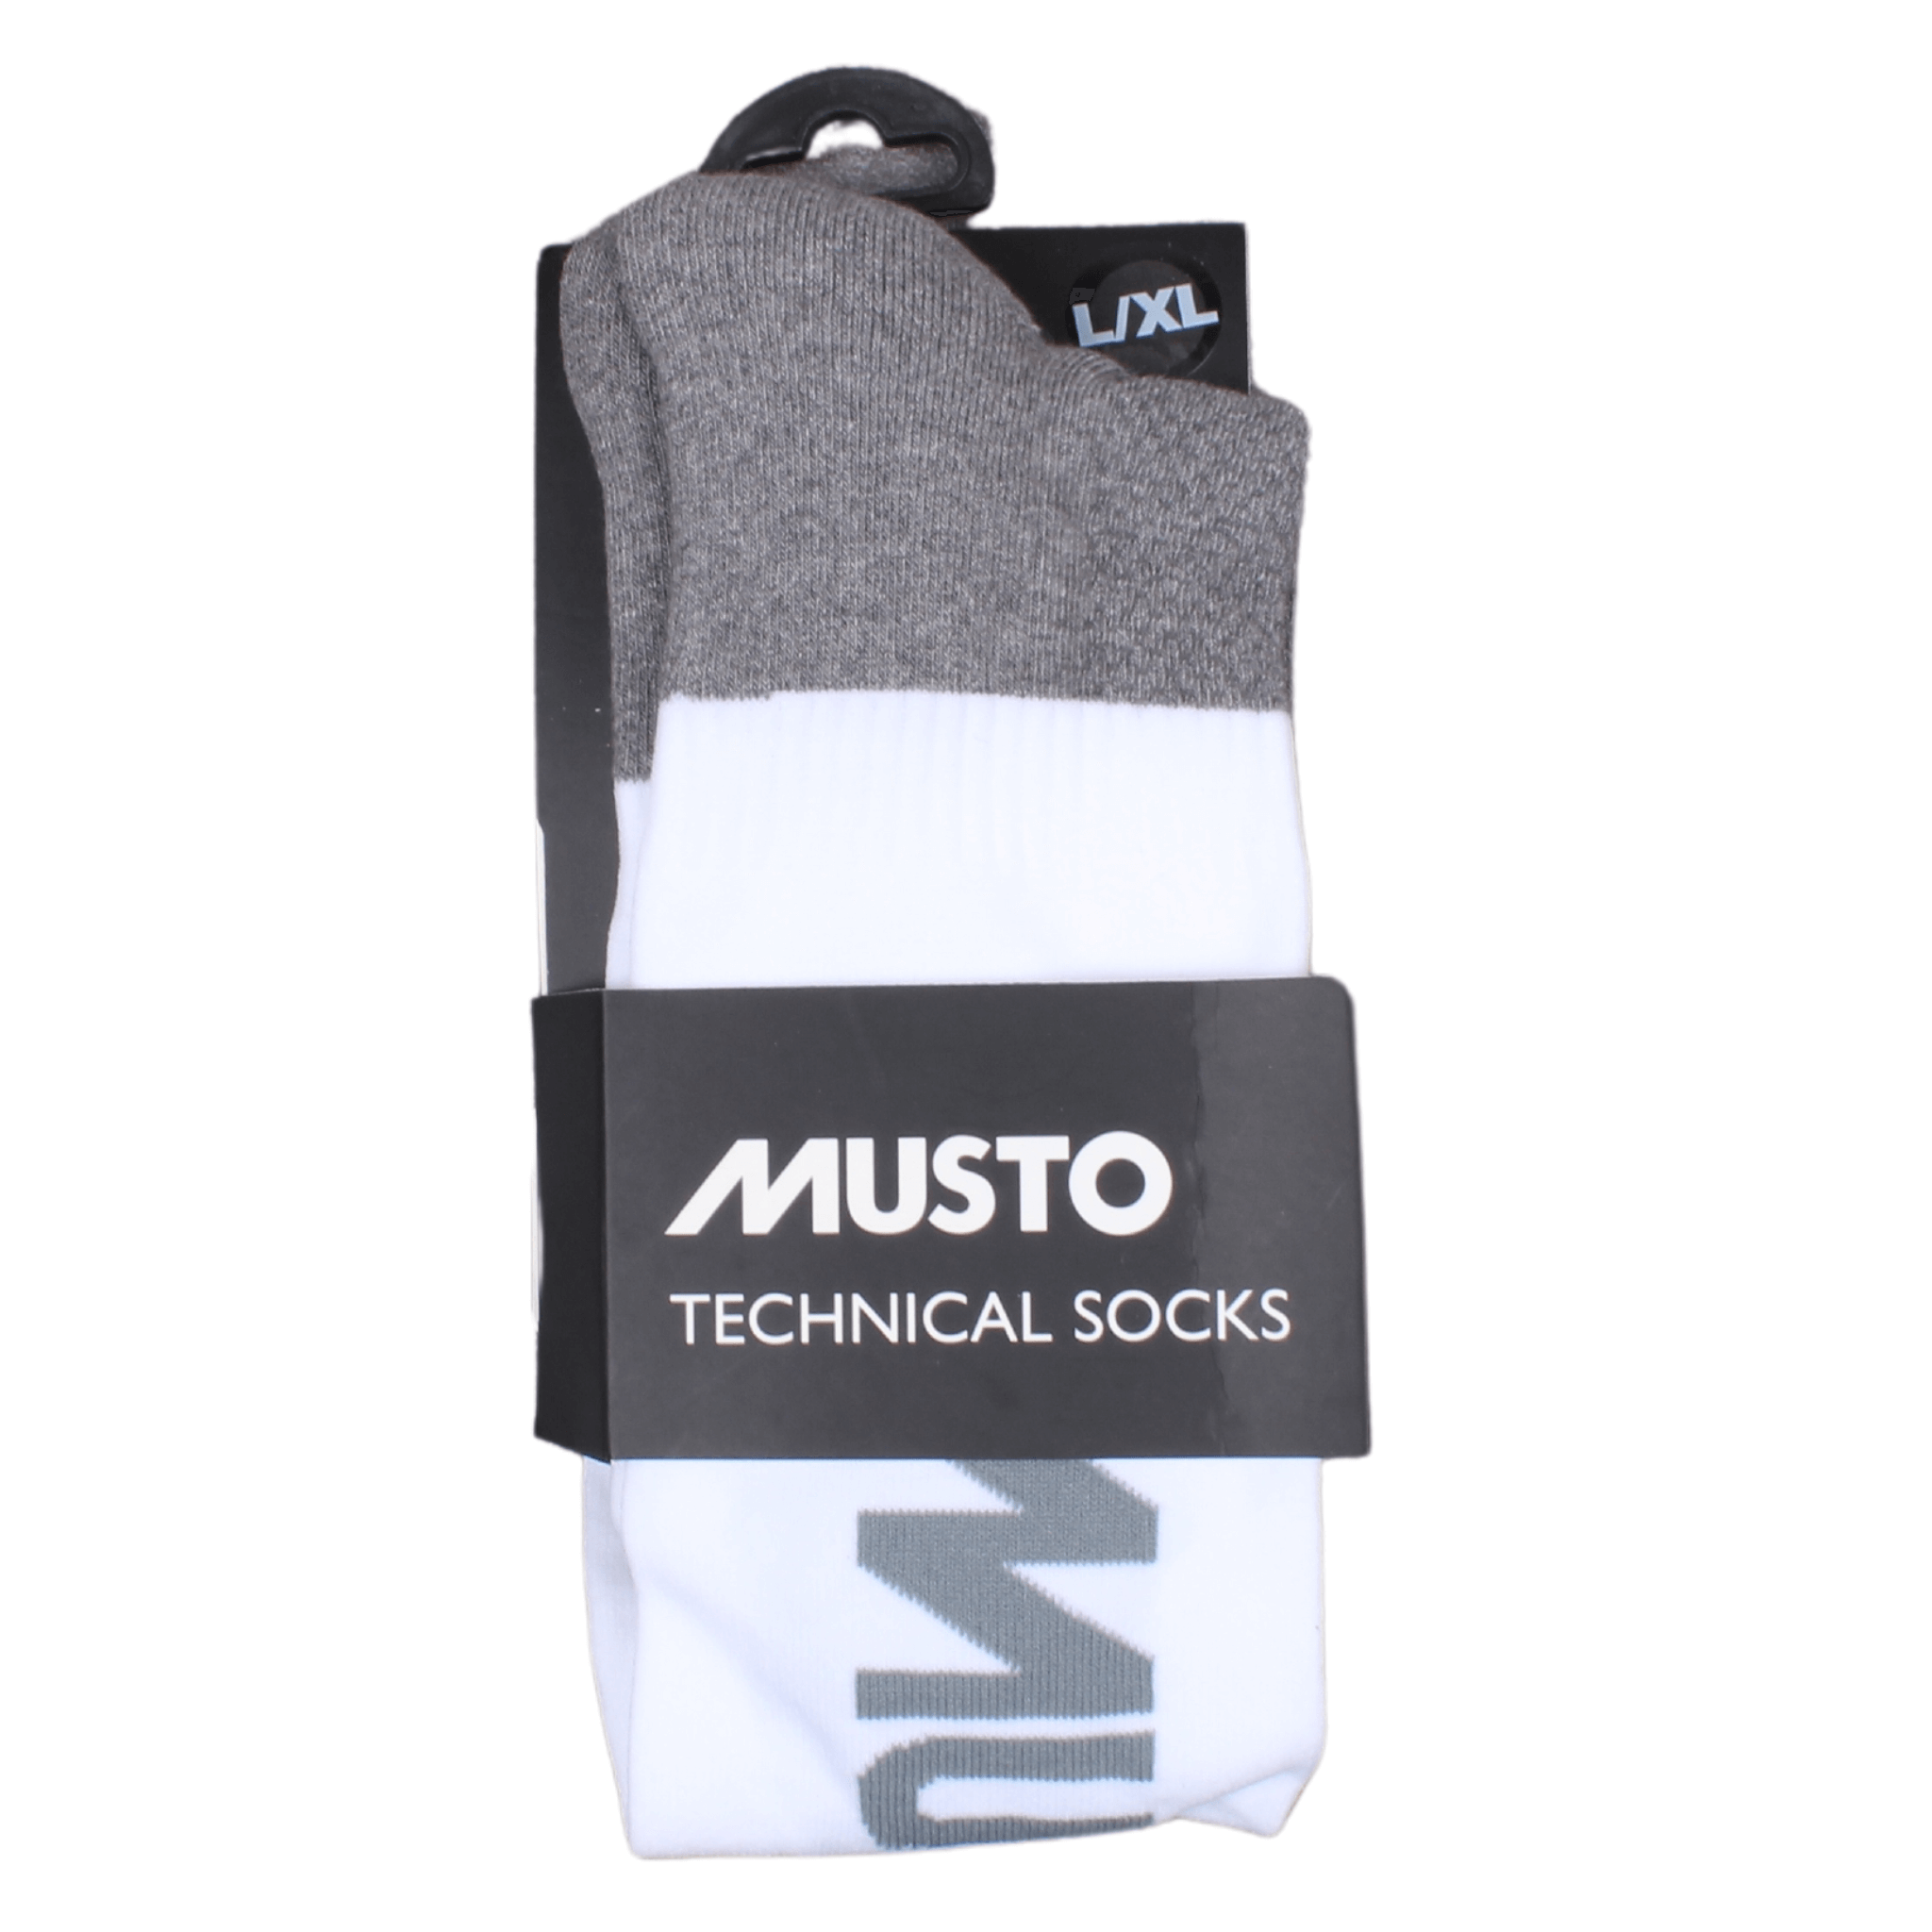 Close up view of the Musto technical socks in White showing part of the brand logo